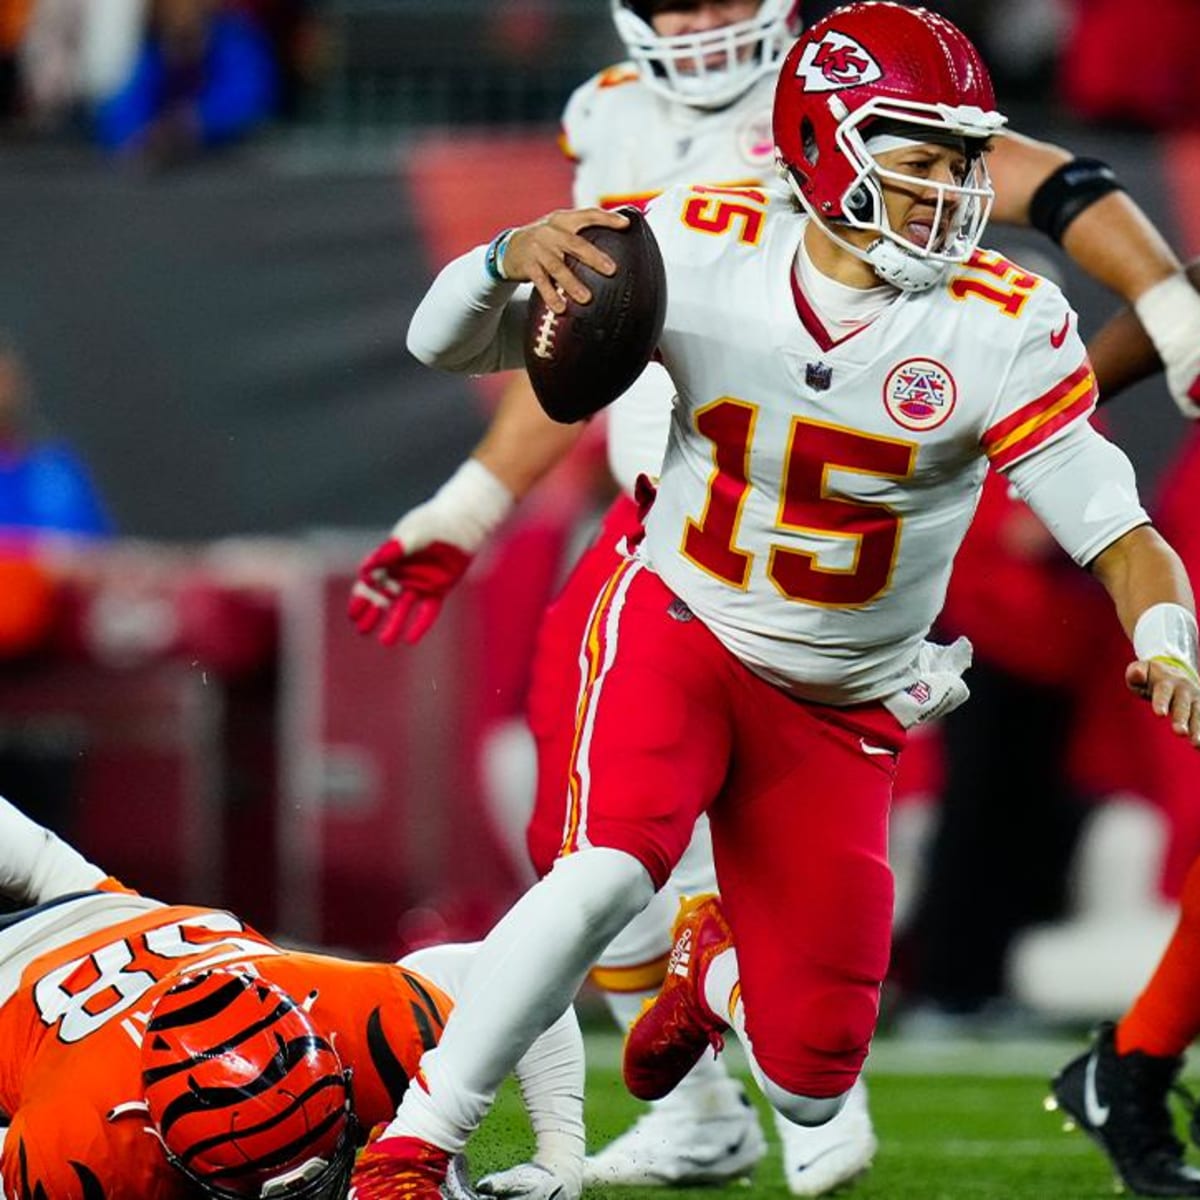 2021 NFL playoffs: What to watch for in Bengals-Chiefs AFC Championship Game